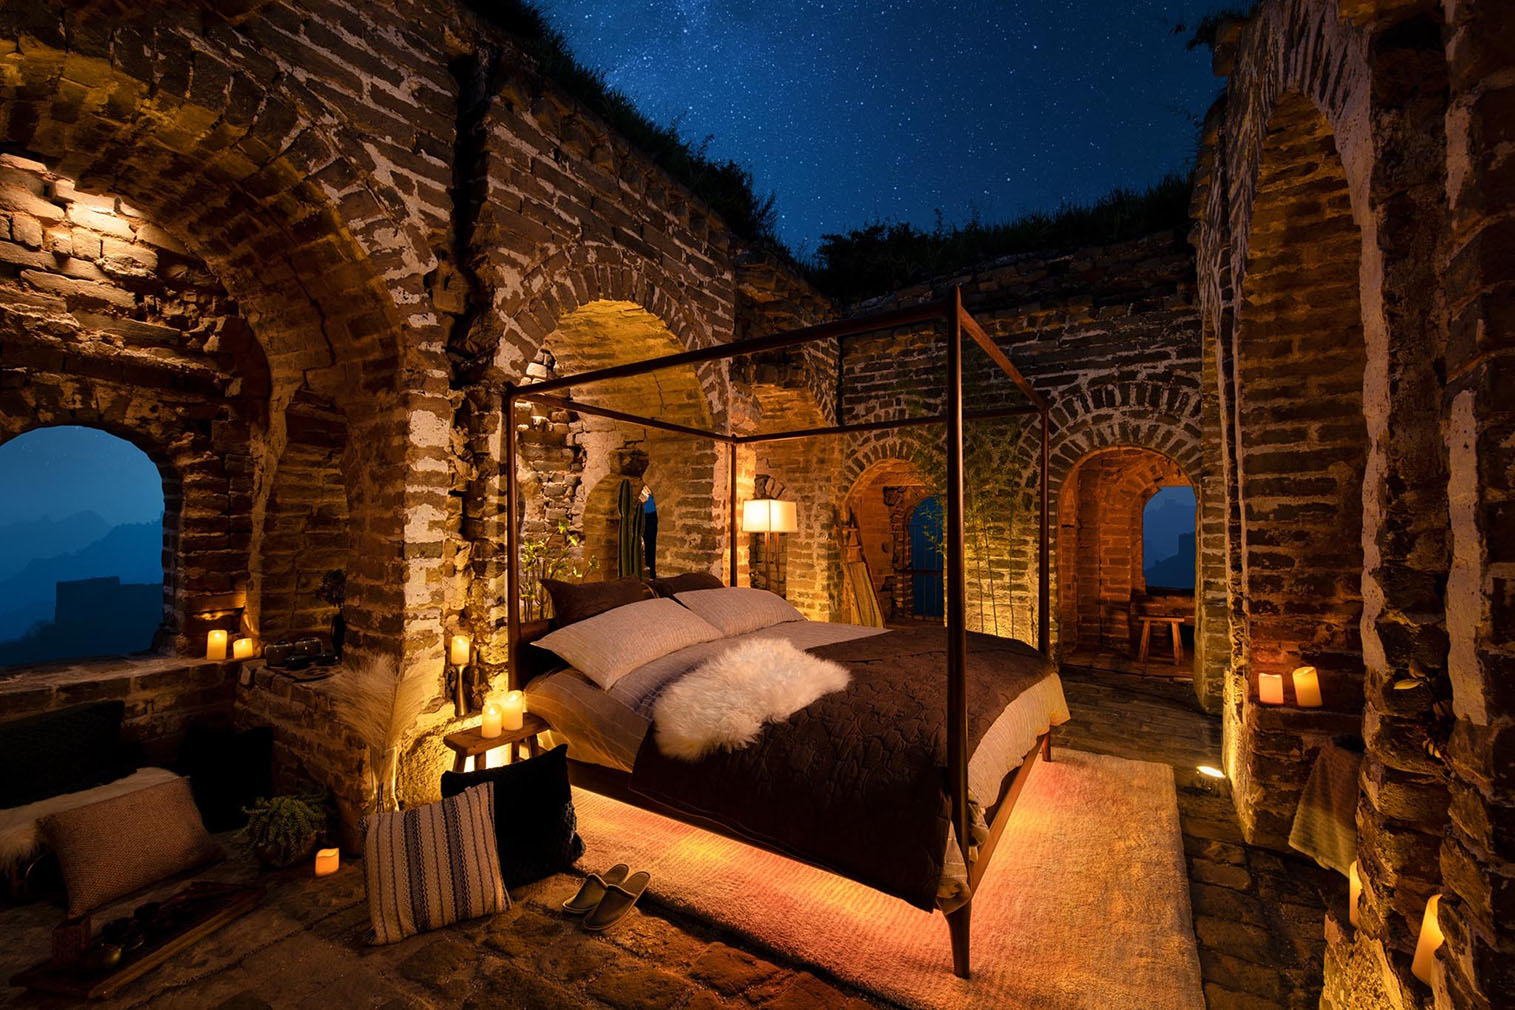 Sleep on the Great Wall of China via Airbnb